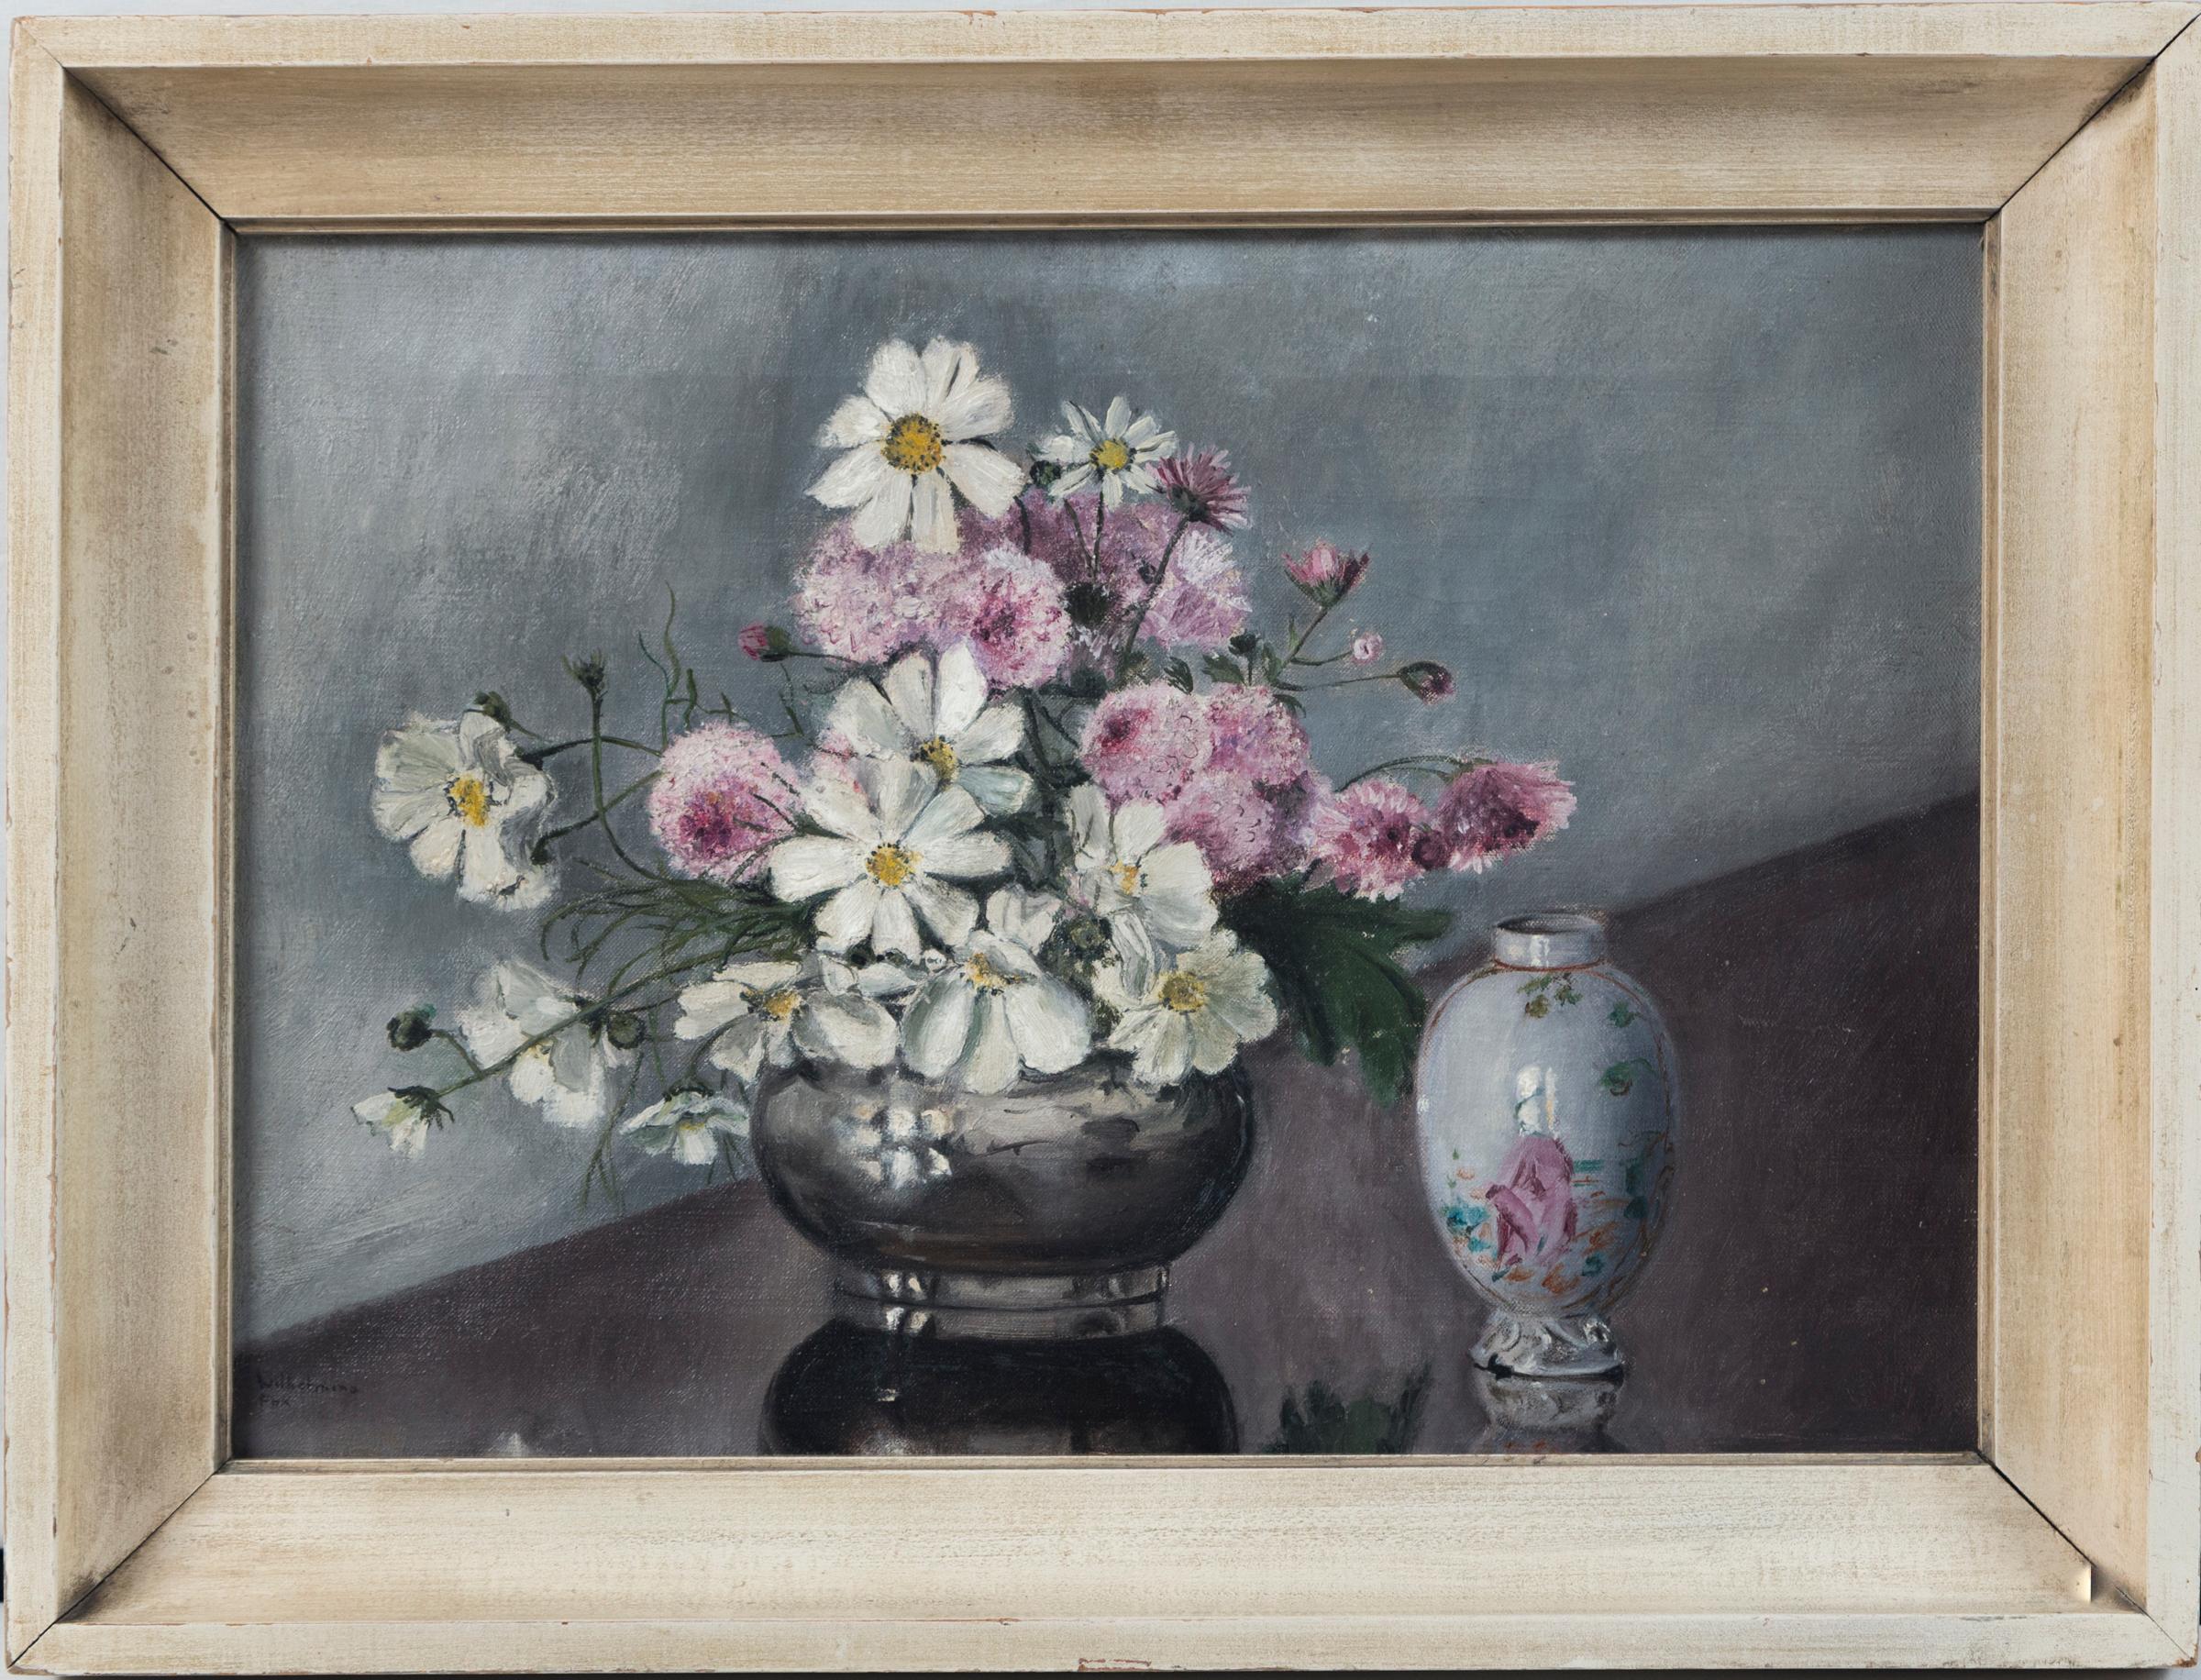 Folk Art Still Life, 'Flowers and Chinese Export Porcelain', early 20th century. Oil on canvas with original lacquered frame. A charming painting of cut flowers with antique Chinese export porcelain. Signed lower left. Professionally cleaned.